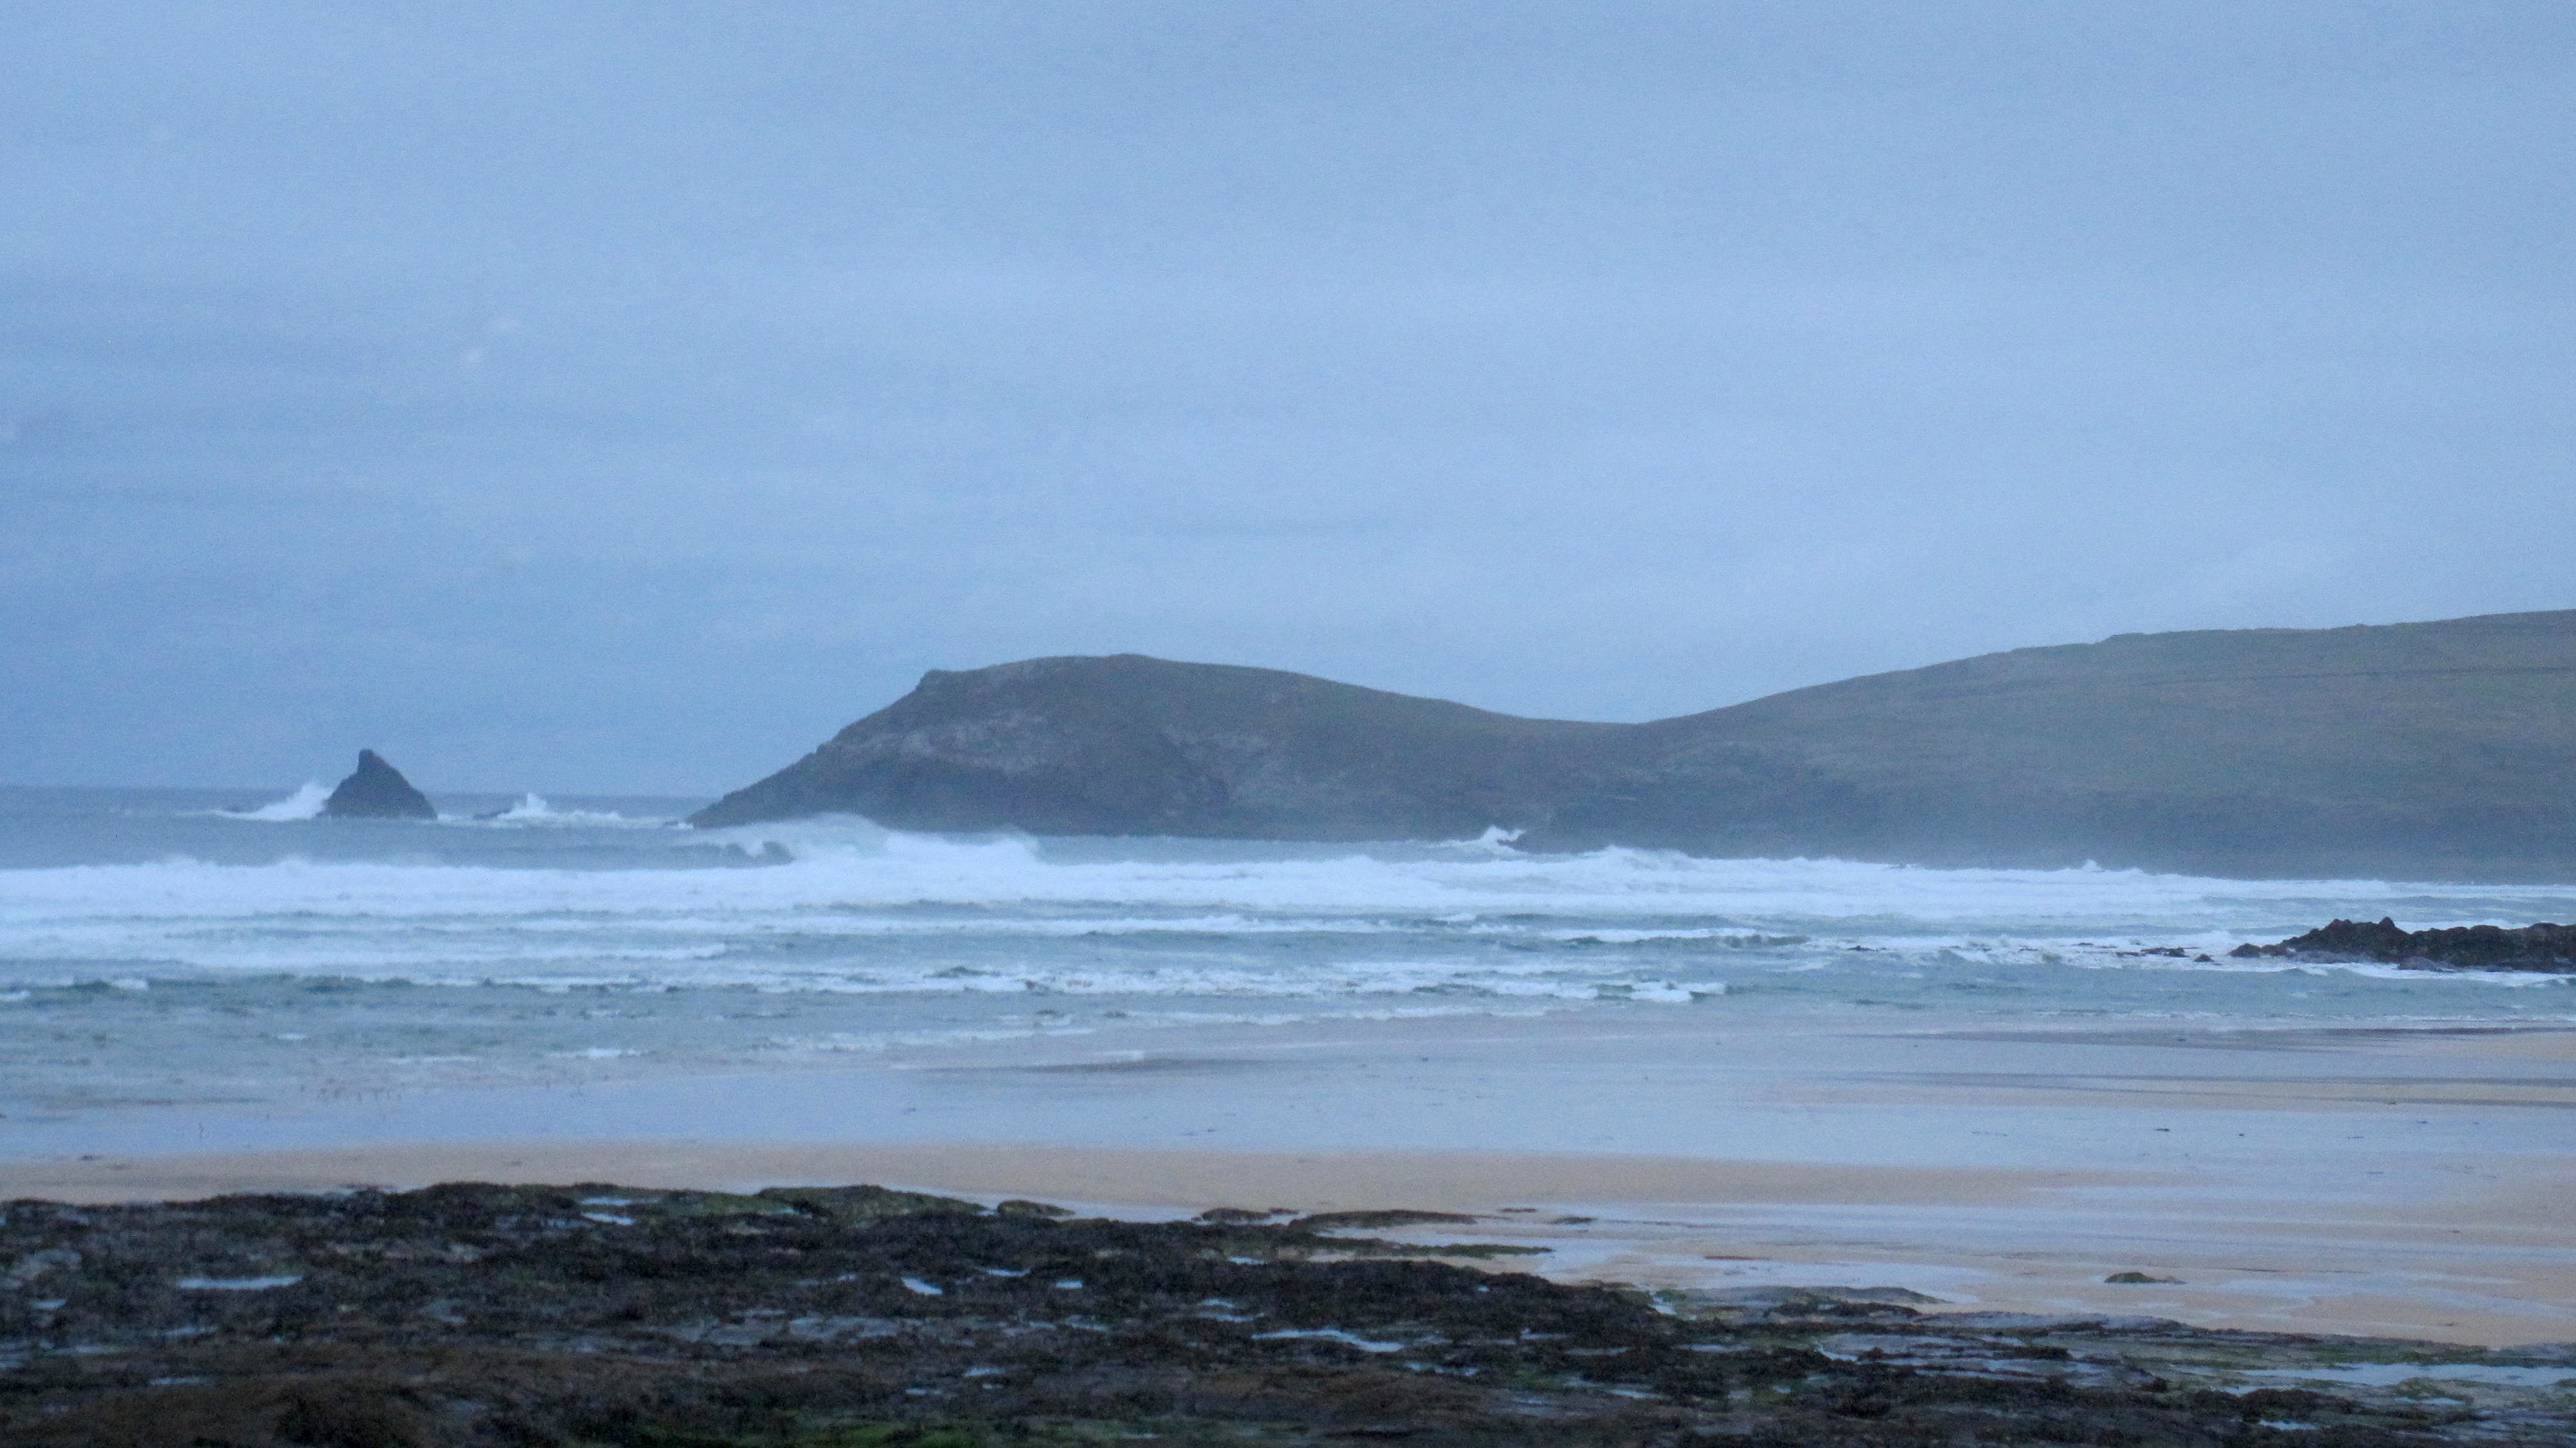 Surf Report for Friday 23rd October 2015